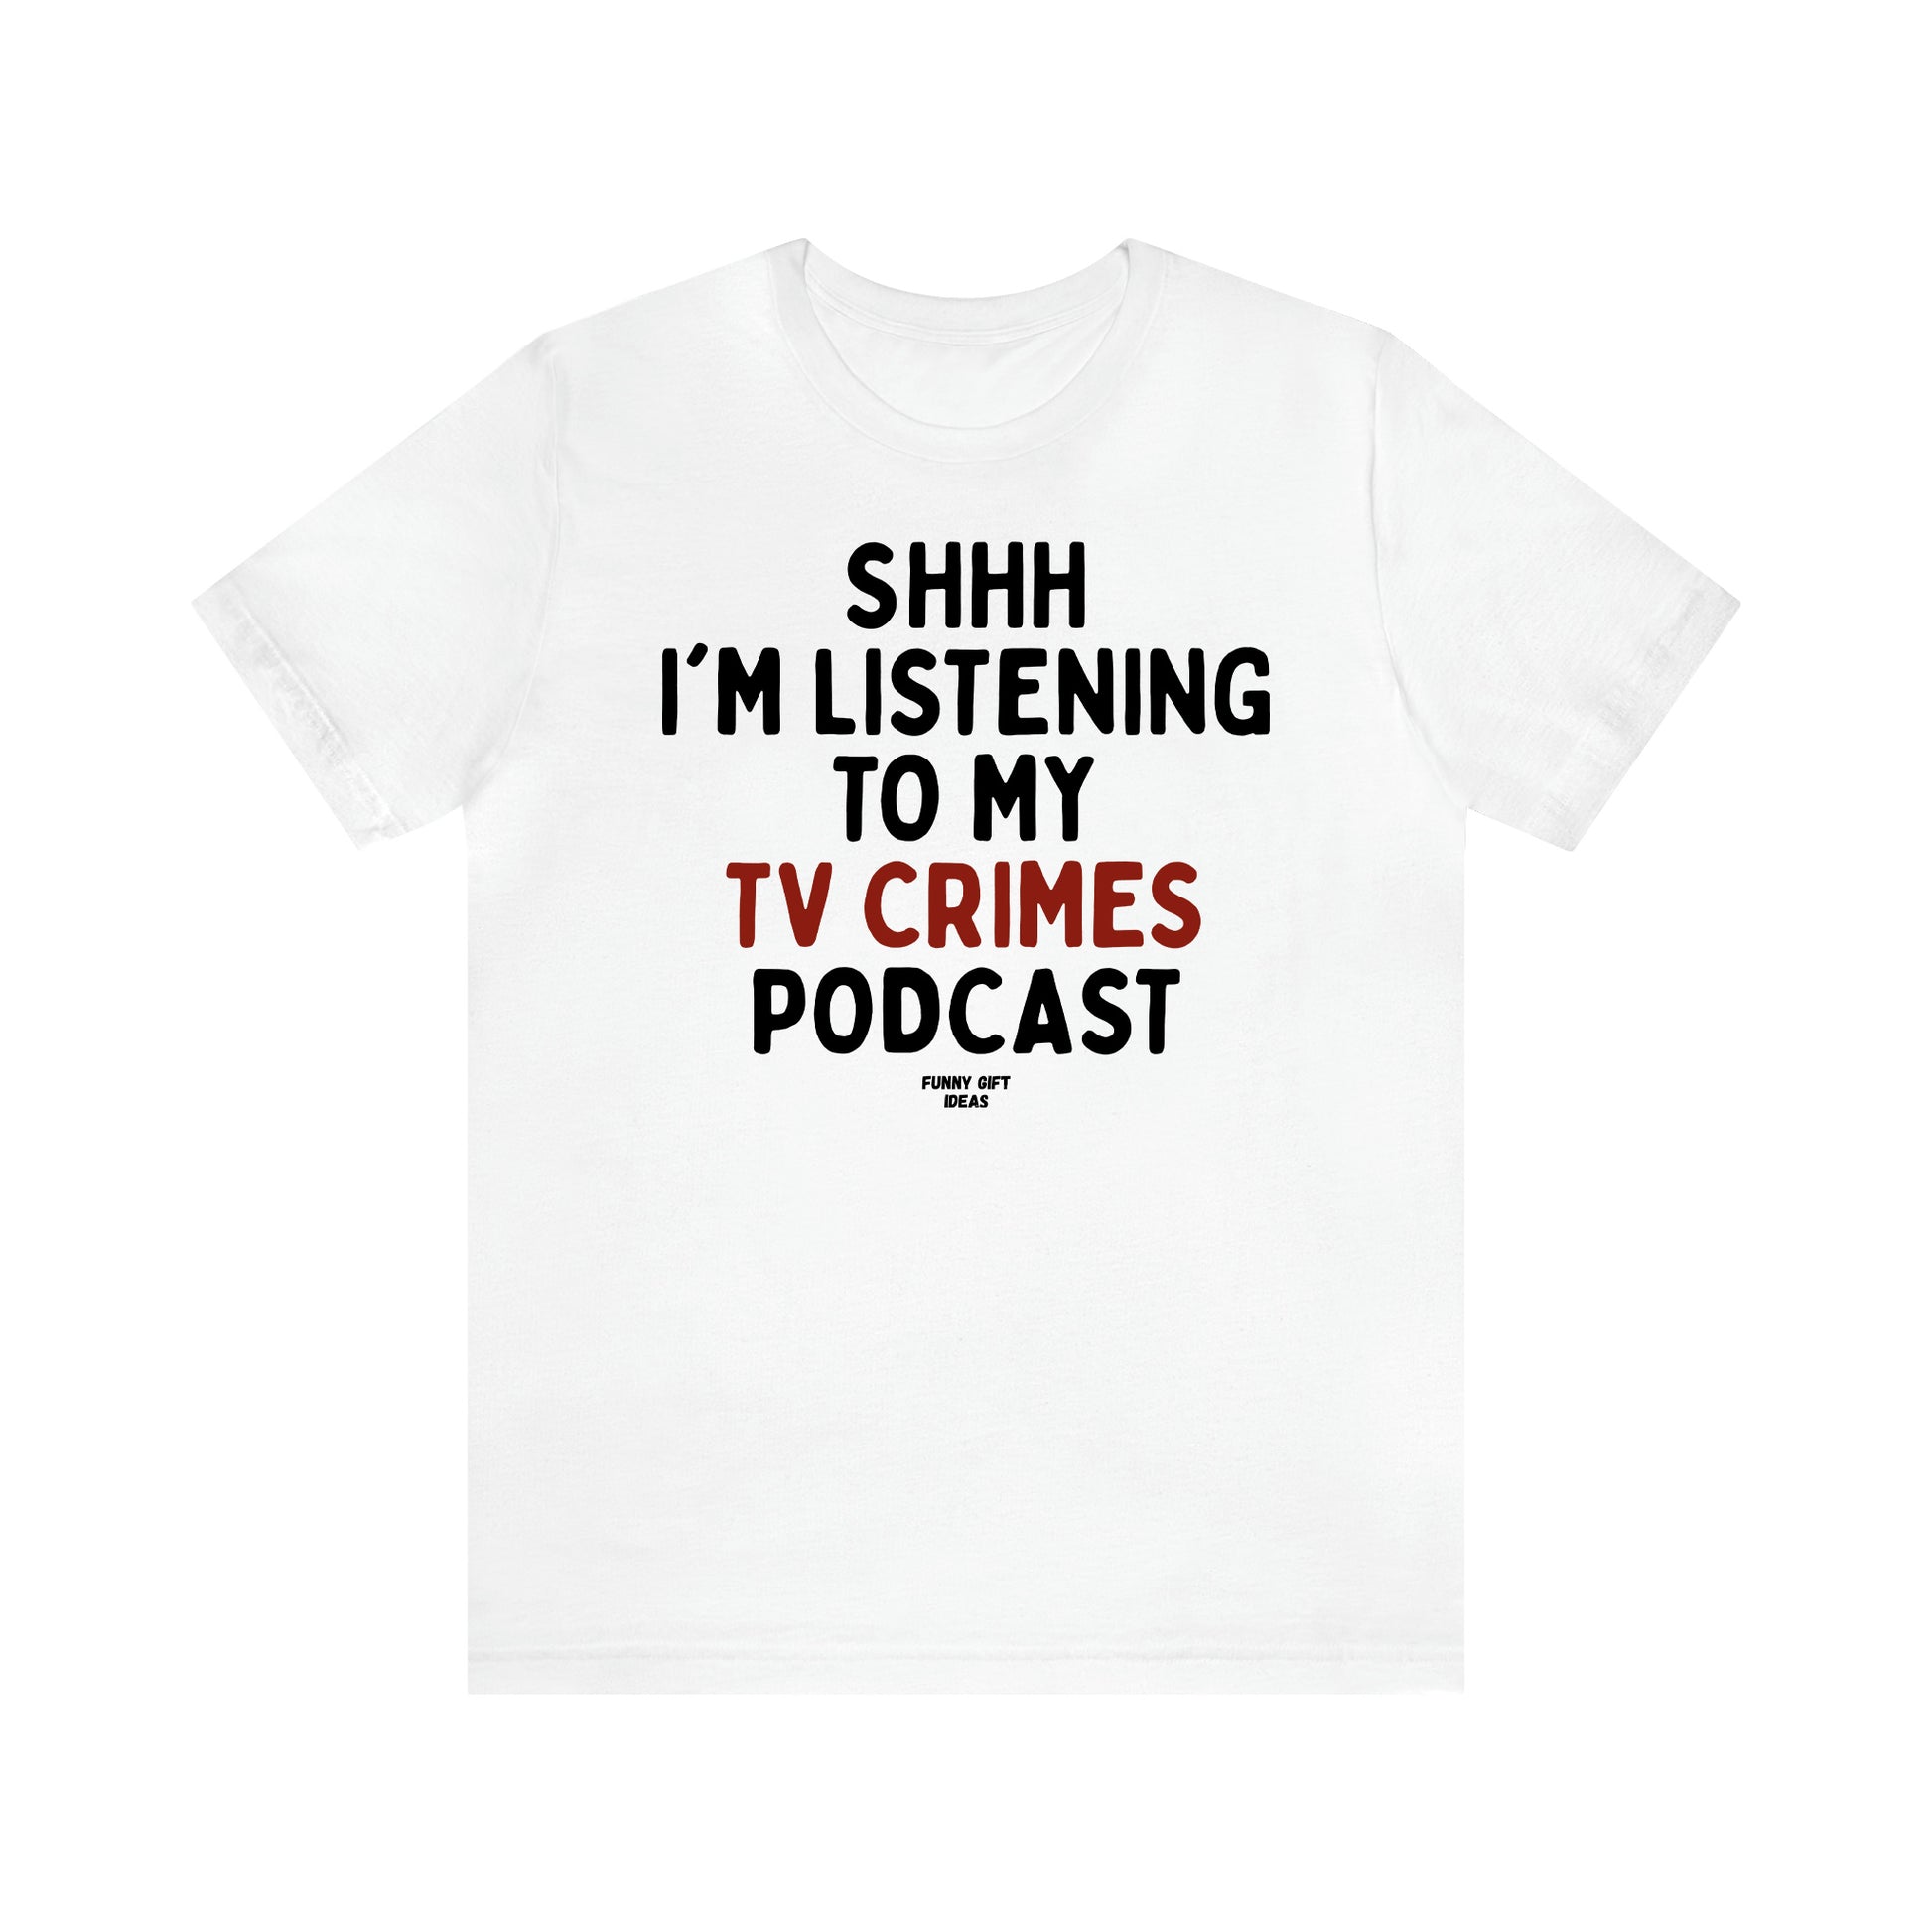 Women's T Shirts Shhh I'm Listening to My True Crime Podcast - Funny Gift Ideas